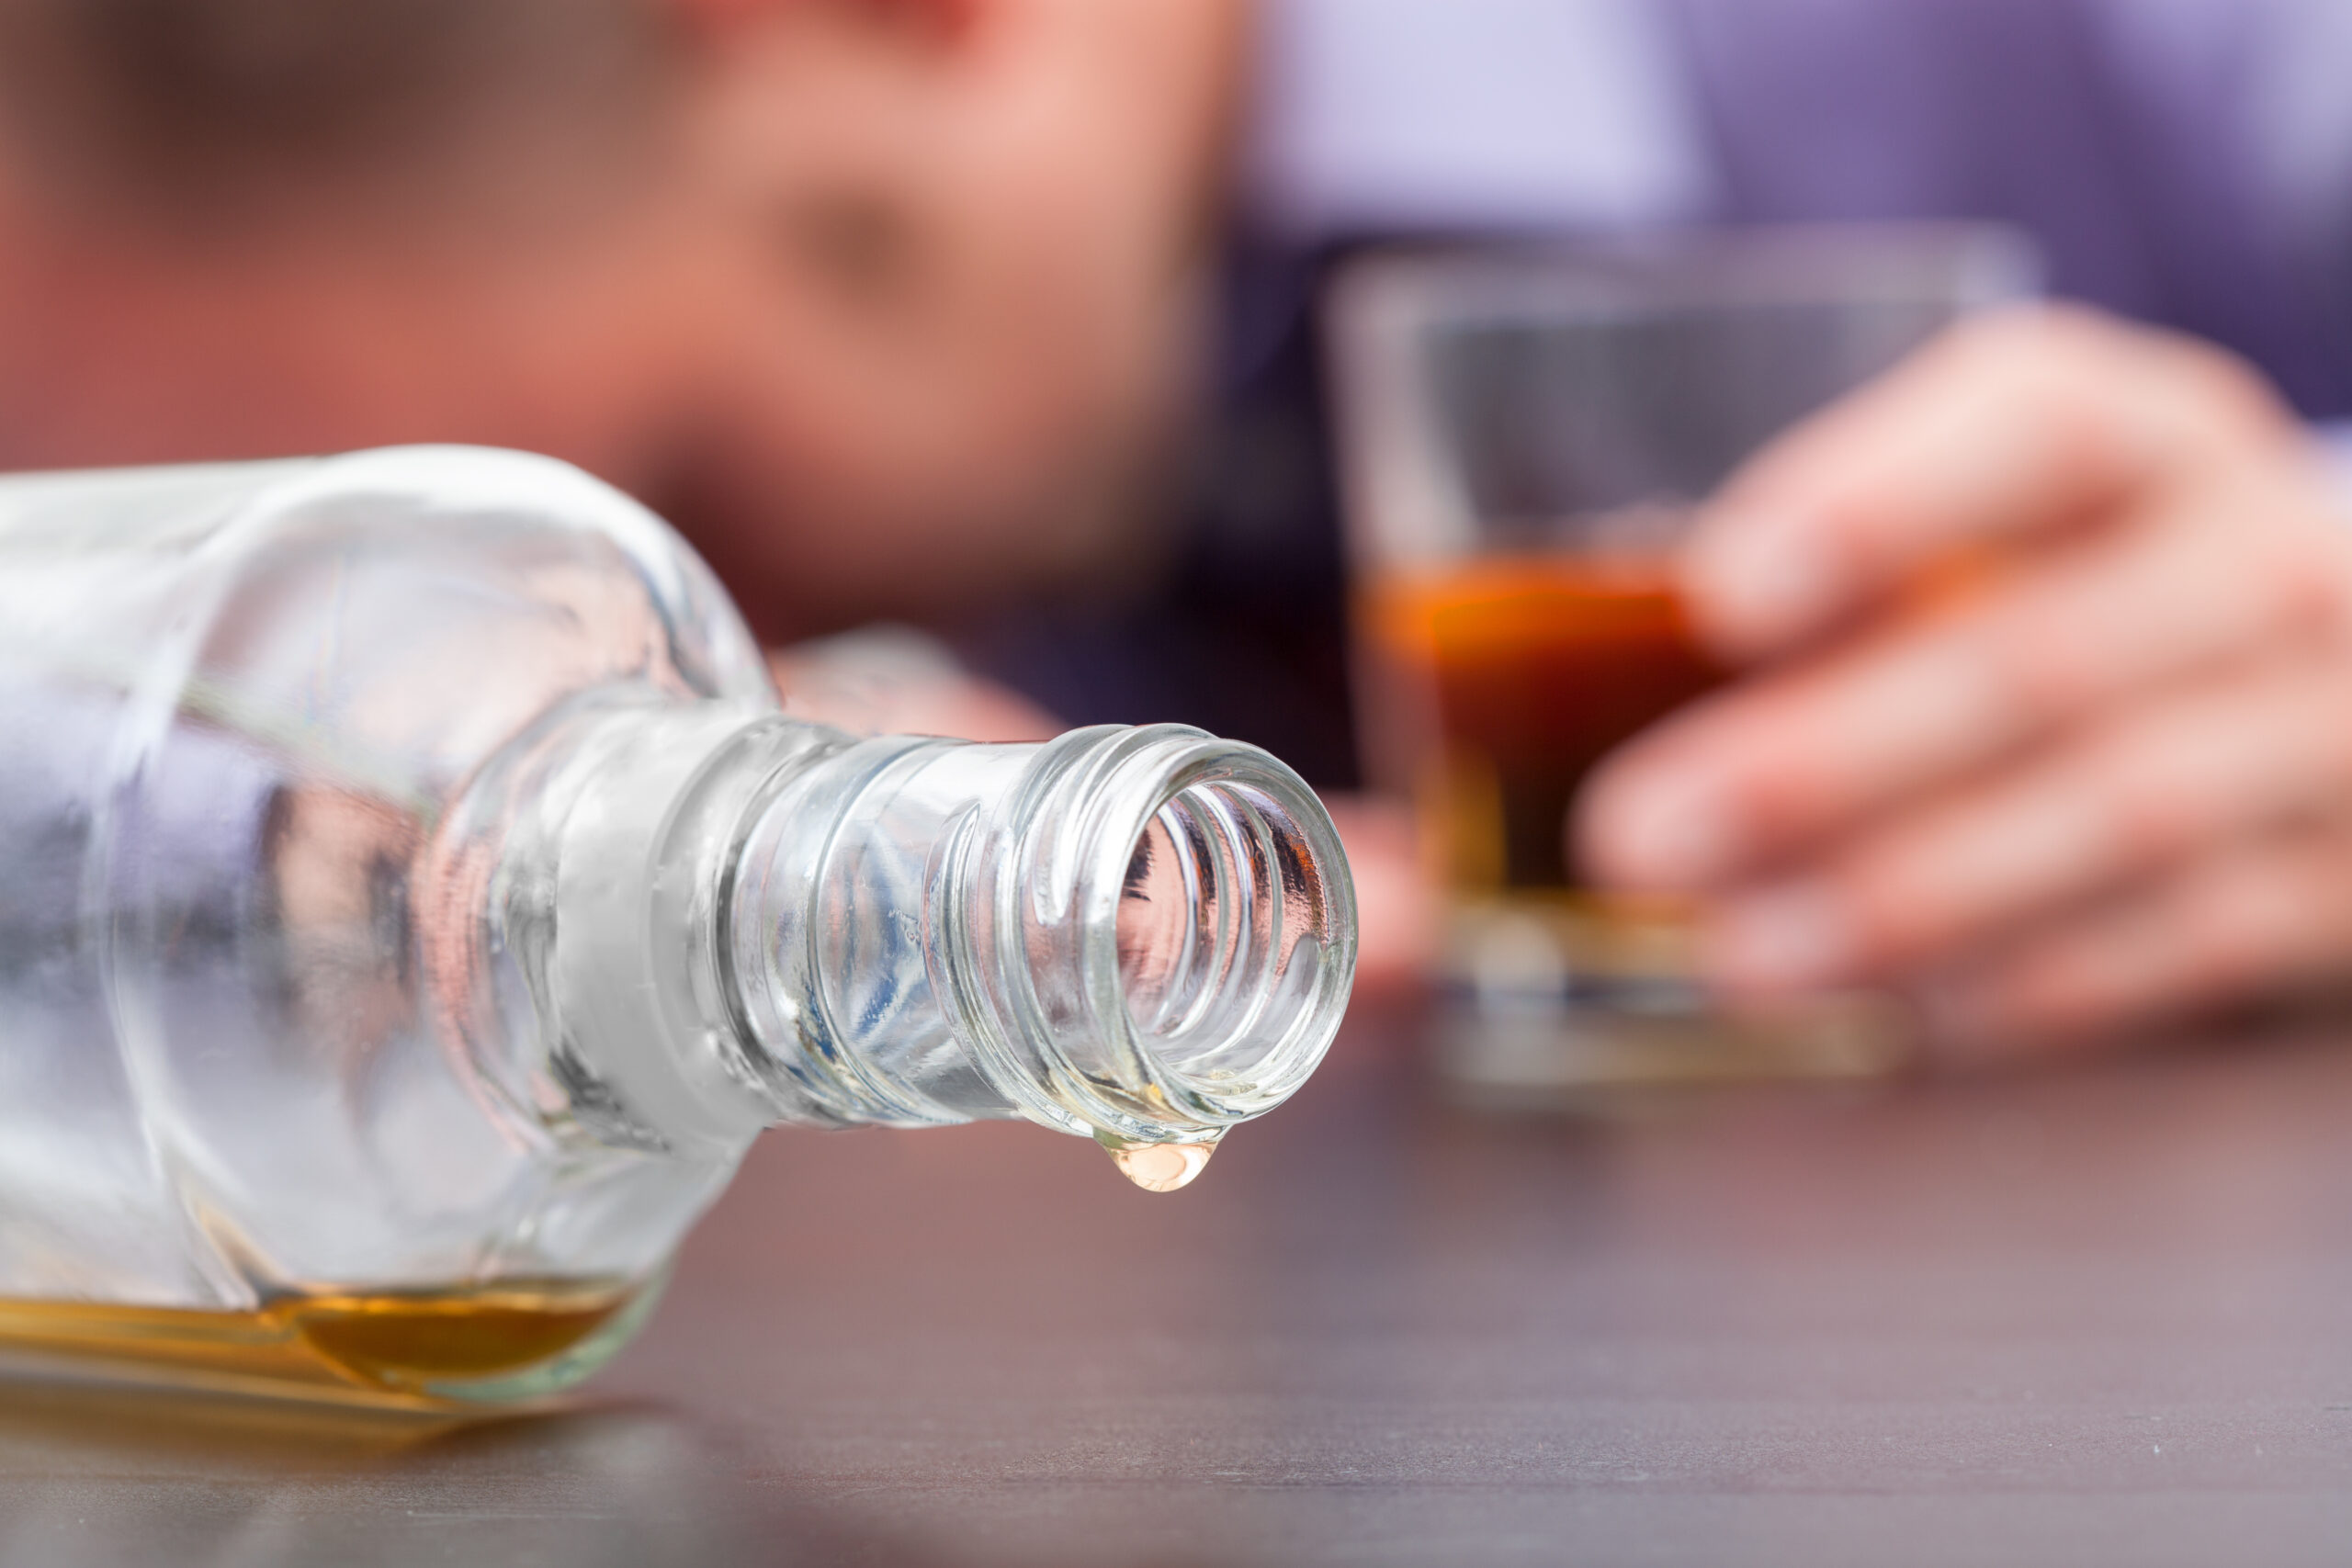 Why is alcohol addictive? Redefine your relationship with alcohol